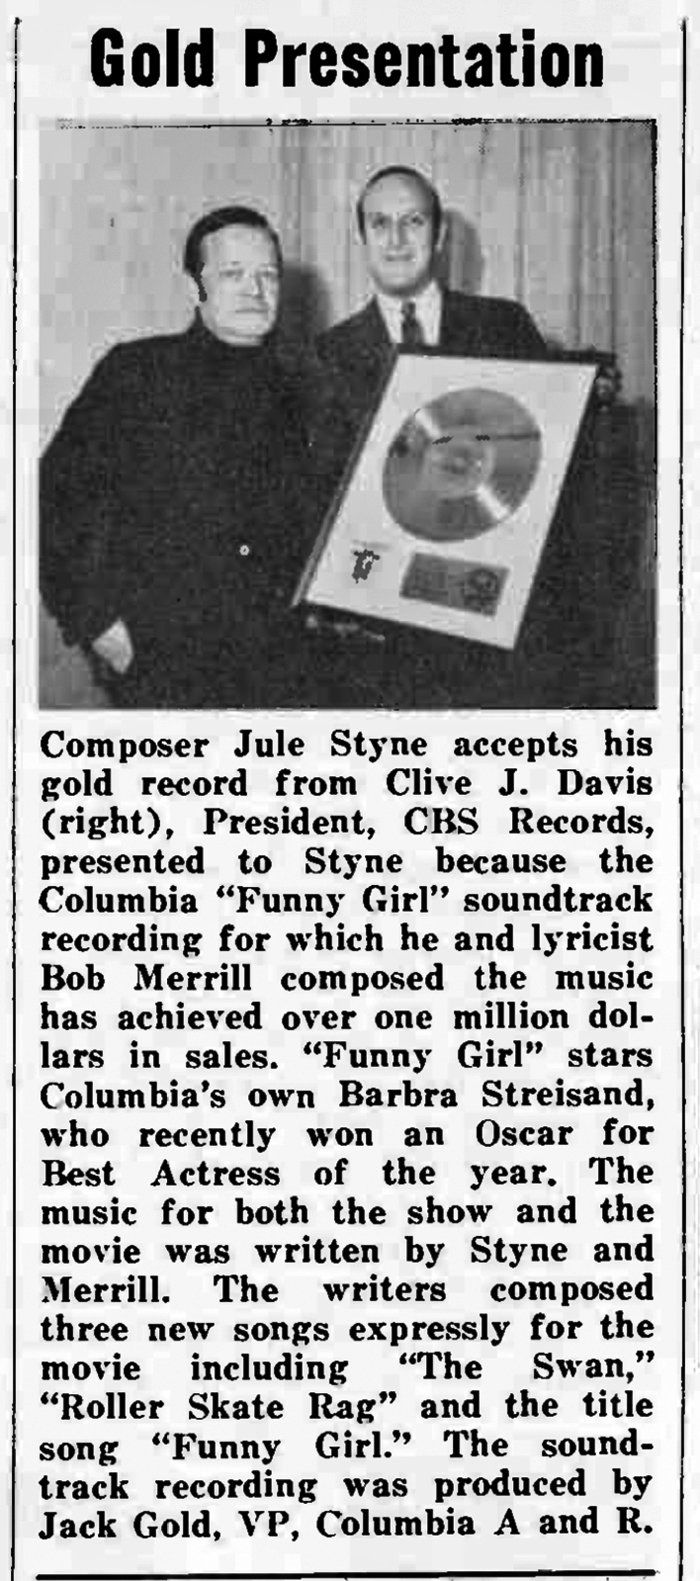 Article in which Clive Davis presents Jule Styne with a Gold Album award for Funny Girl